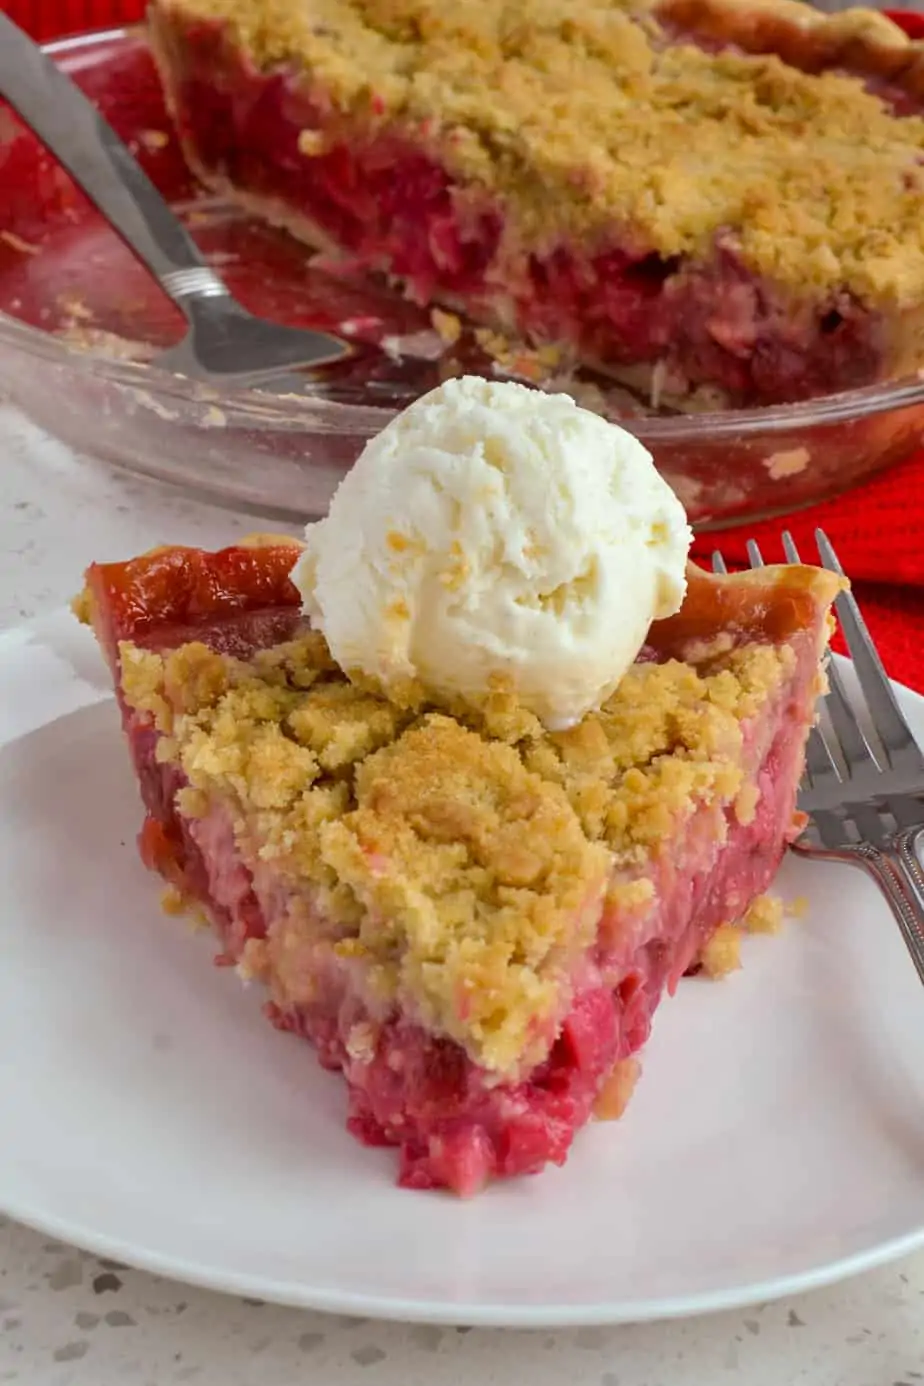 Homemade strawberry and rhubarb pie with an easy crumb topping